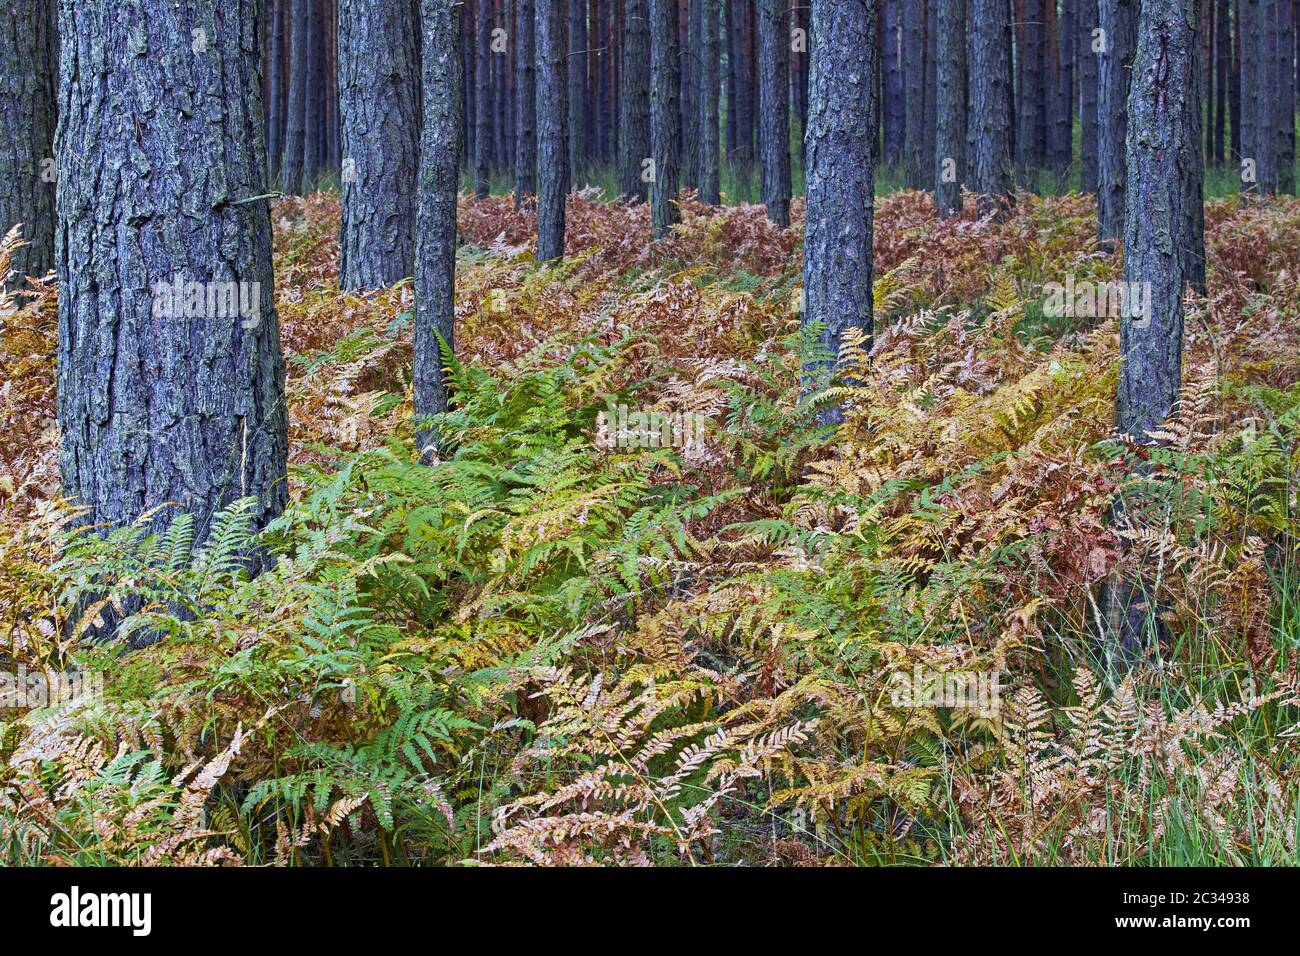 Pine forest in fall with Bracken Fern / Upper Lusatia - Saxony Stock Photo